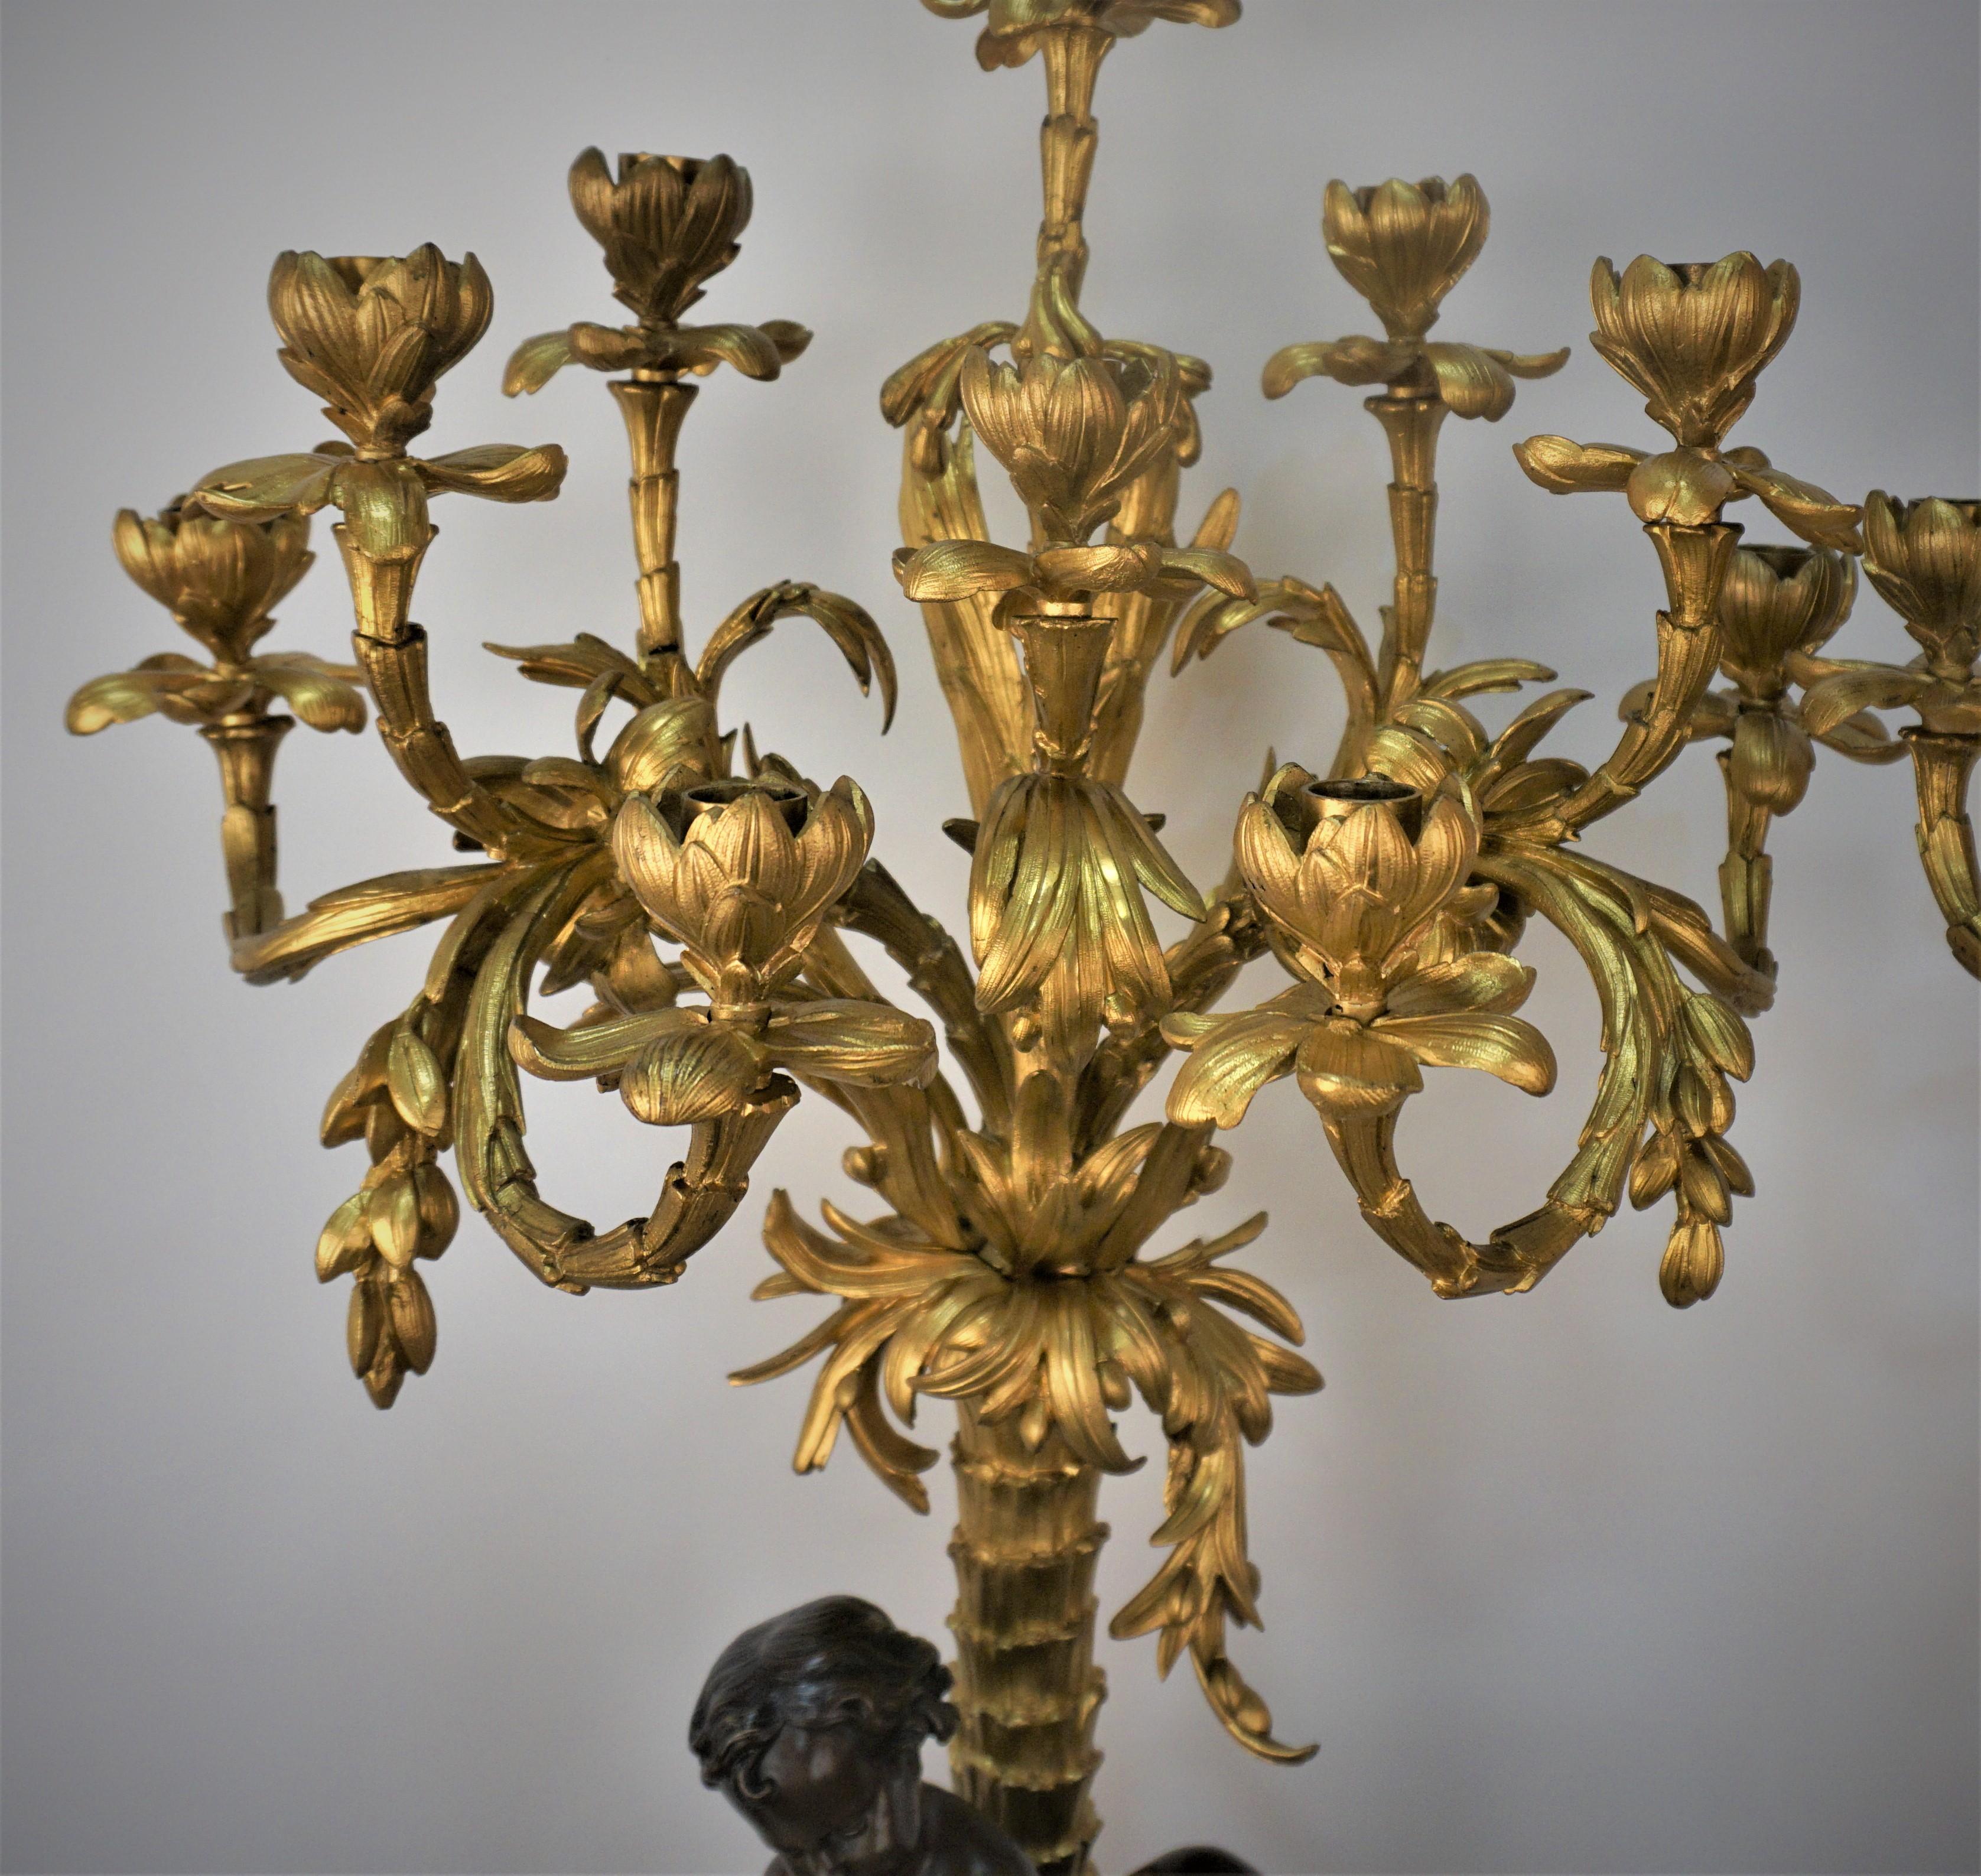 Bronze Pair of French Dore and patinated bronze Candelabra by Henri Picard